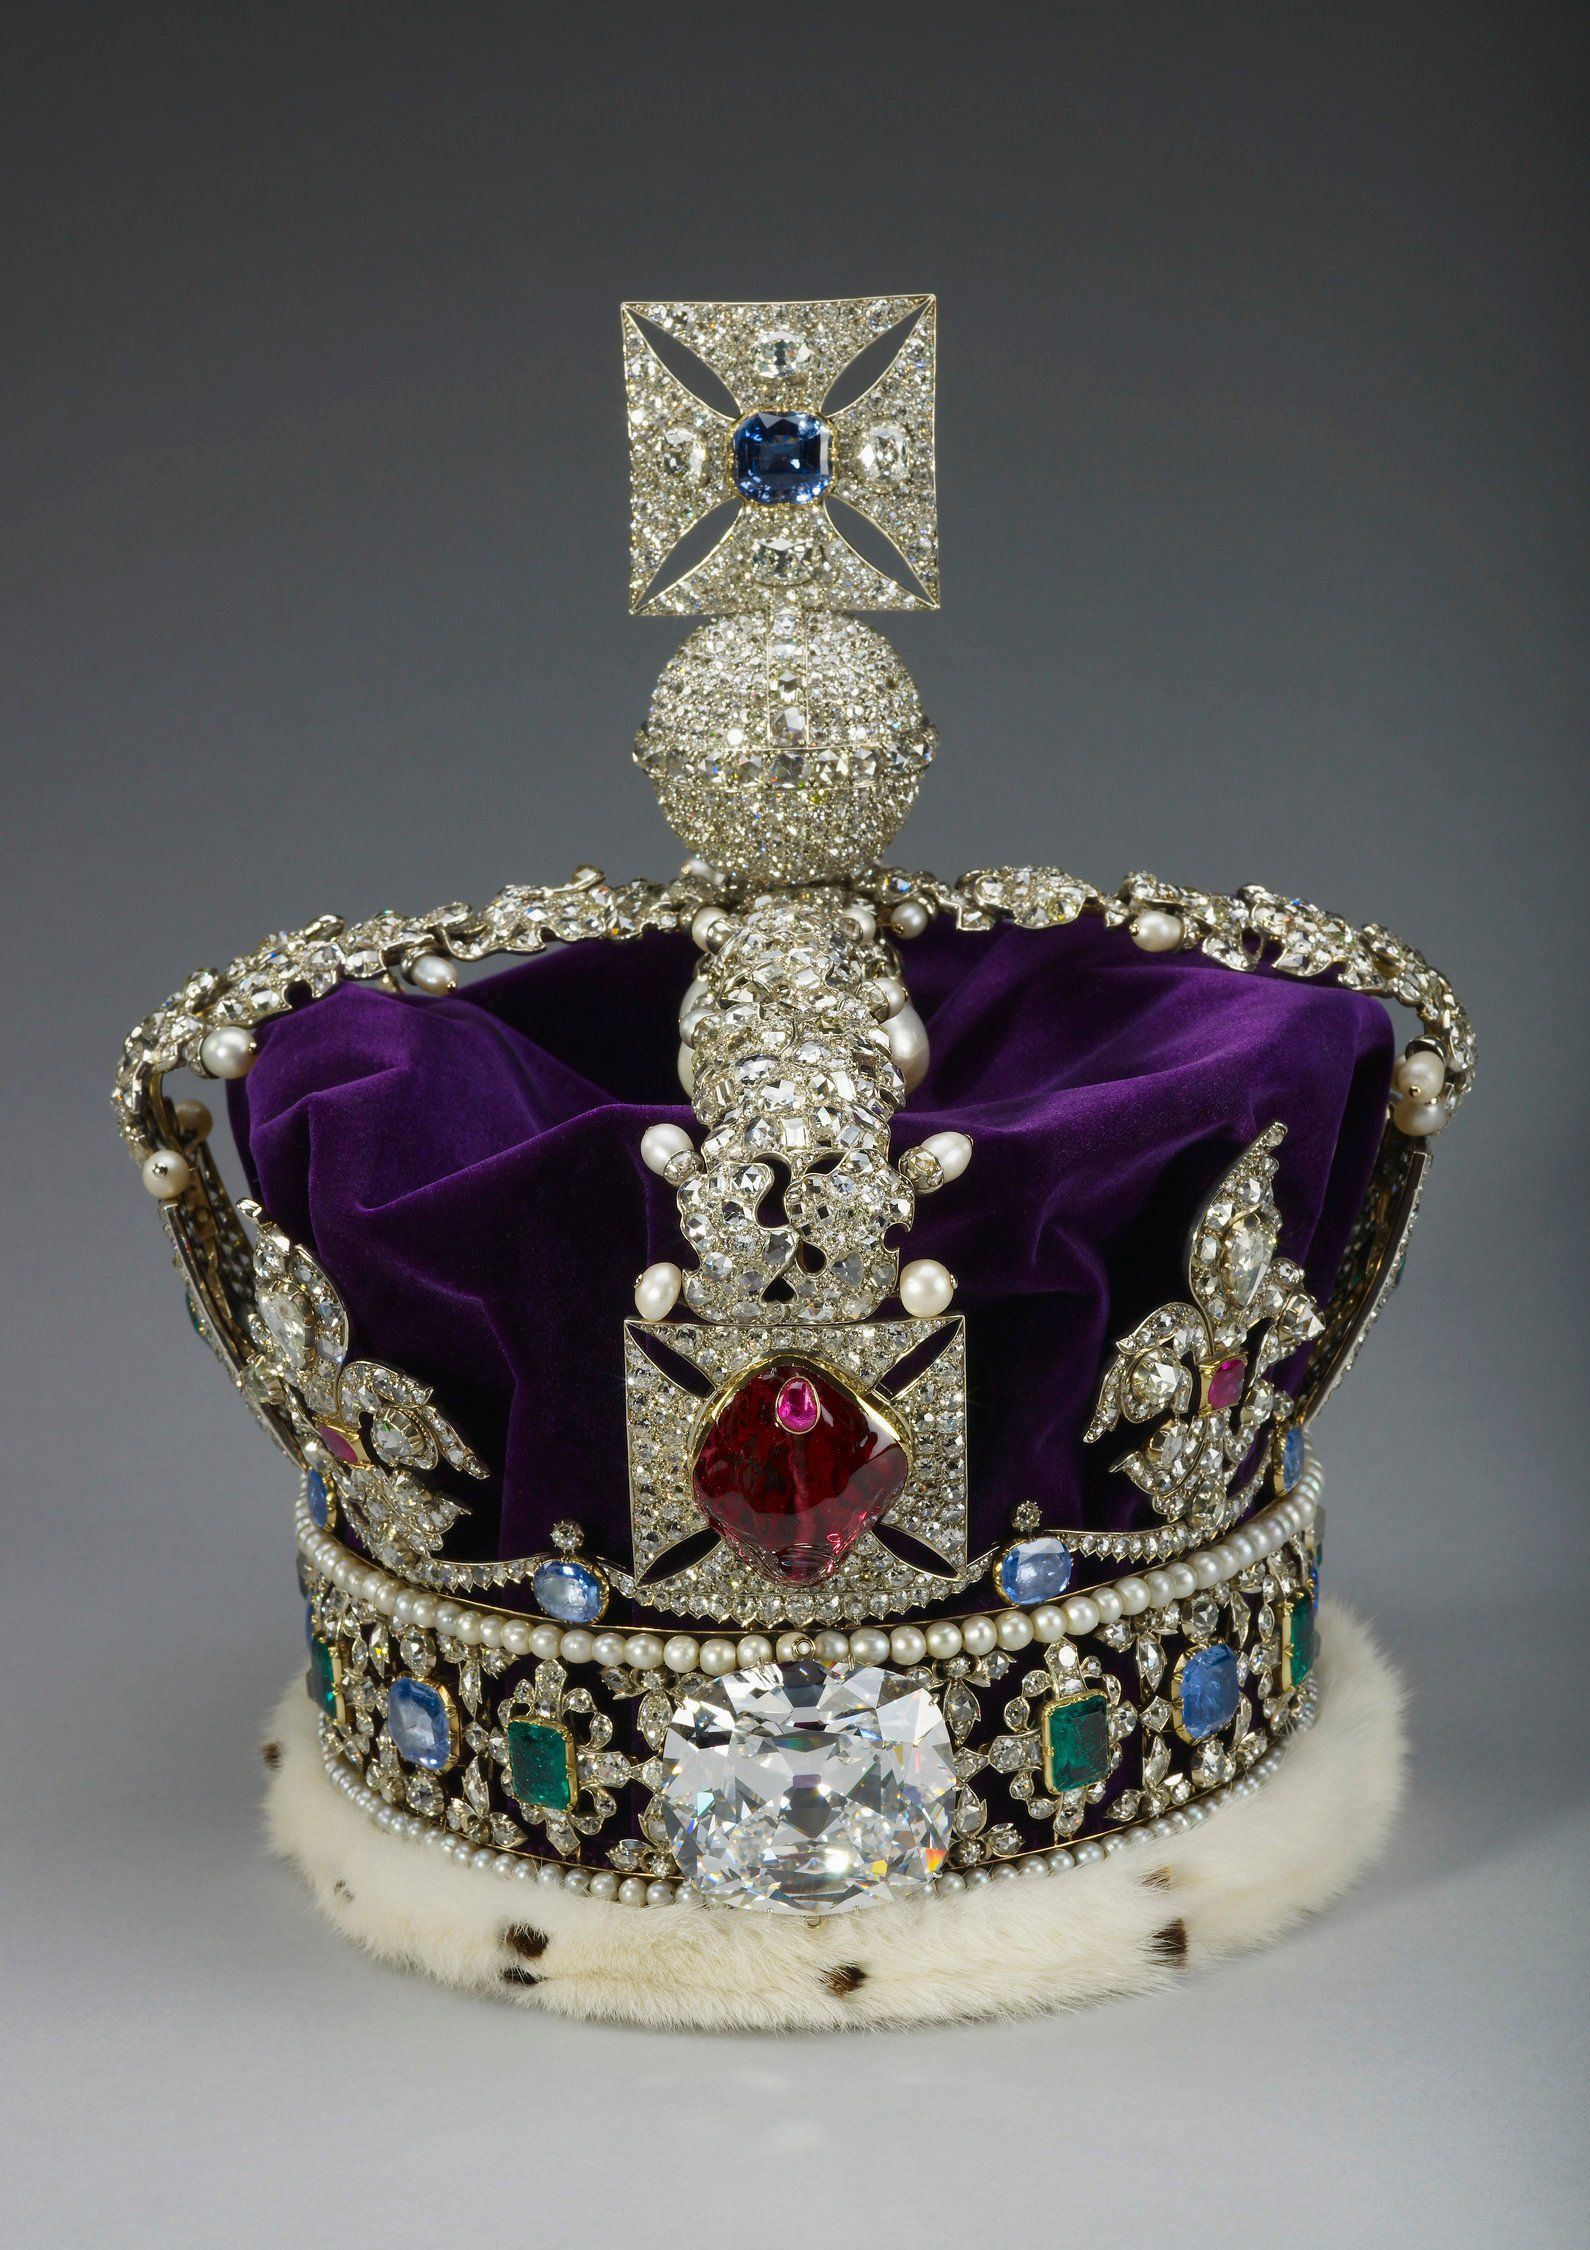 The Imperial State Crown made for the coronation of King George VI in 1937. The large diamond is known as the Cullinan II wearing 317 carats.  (The Cullinan I was placed in the Sovereign's Sceptre. That stones weighs 530 carats.). The Royal Collection Trust.